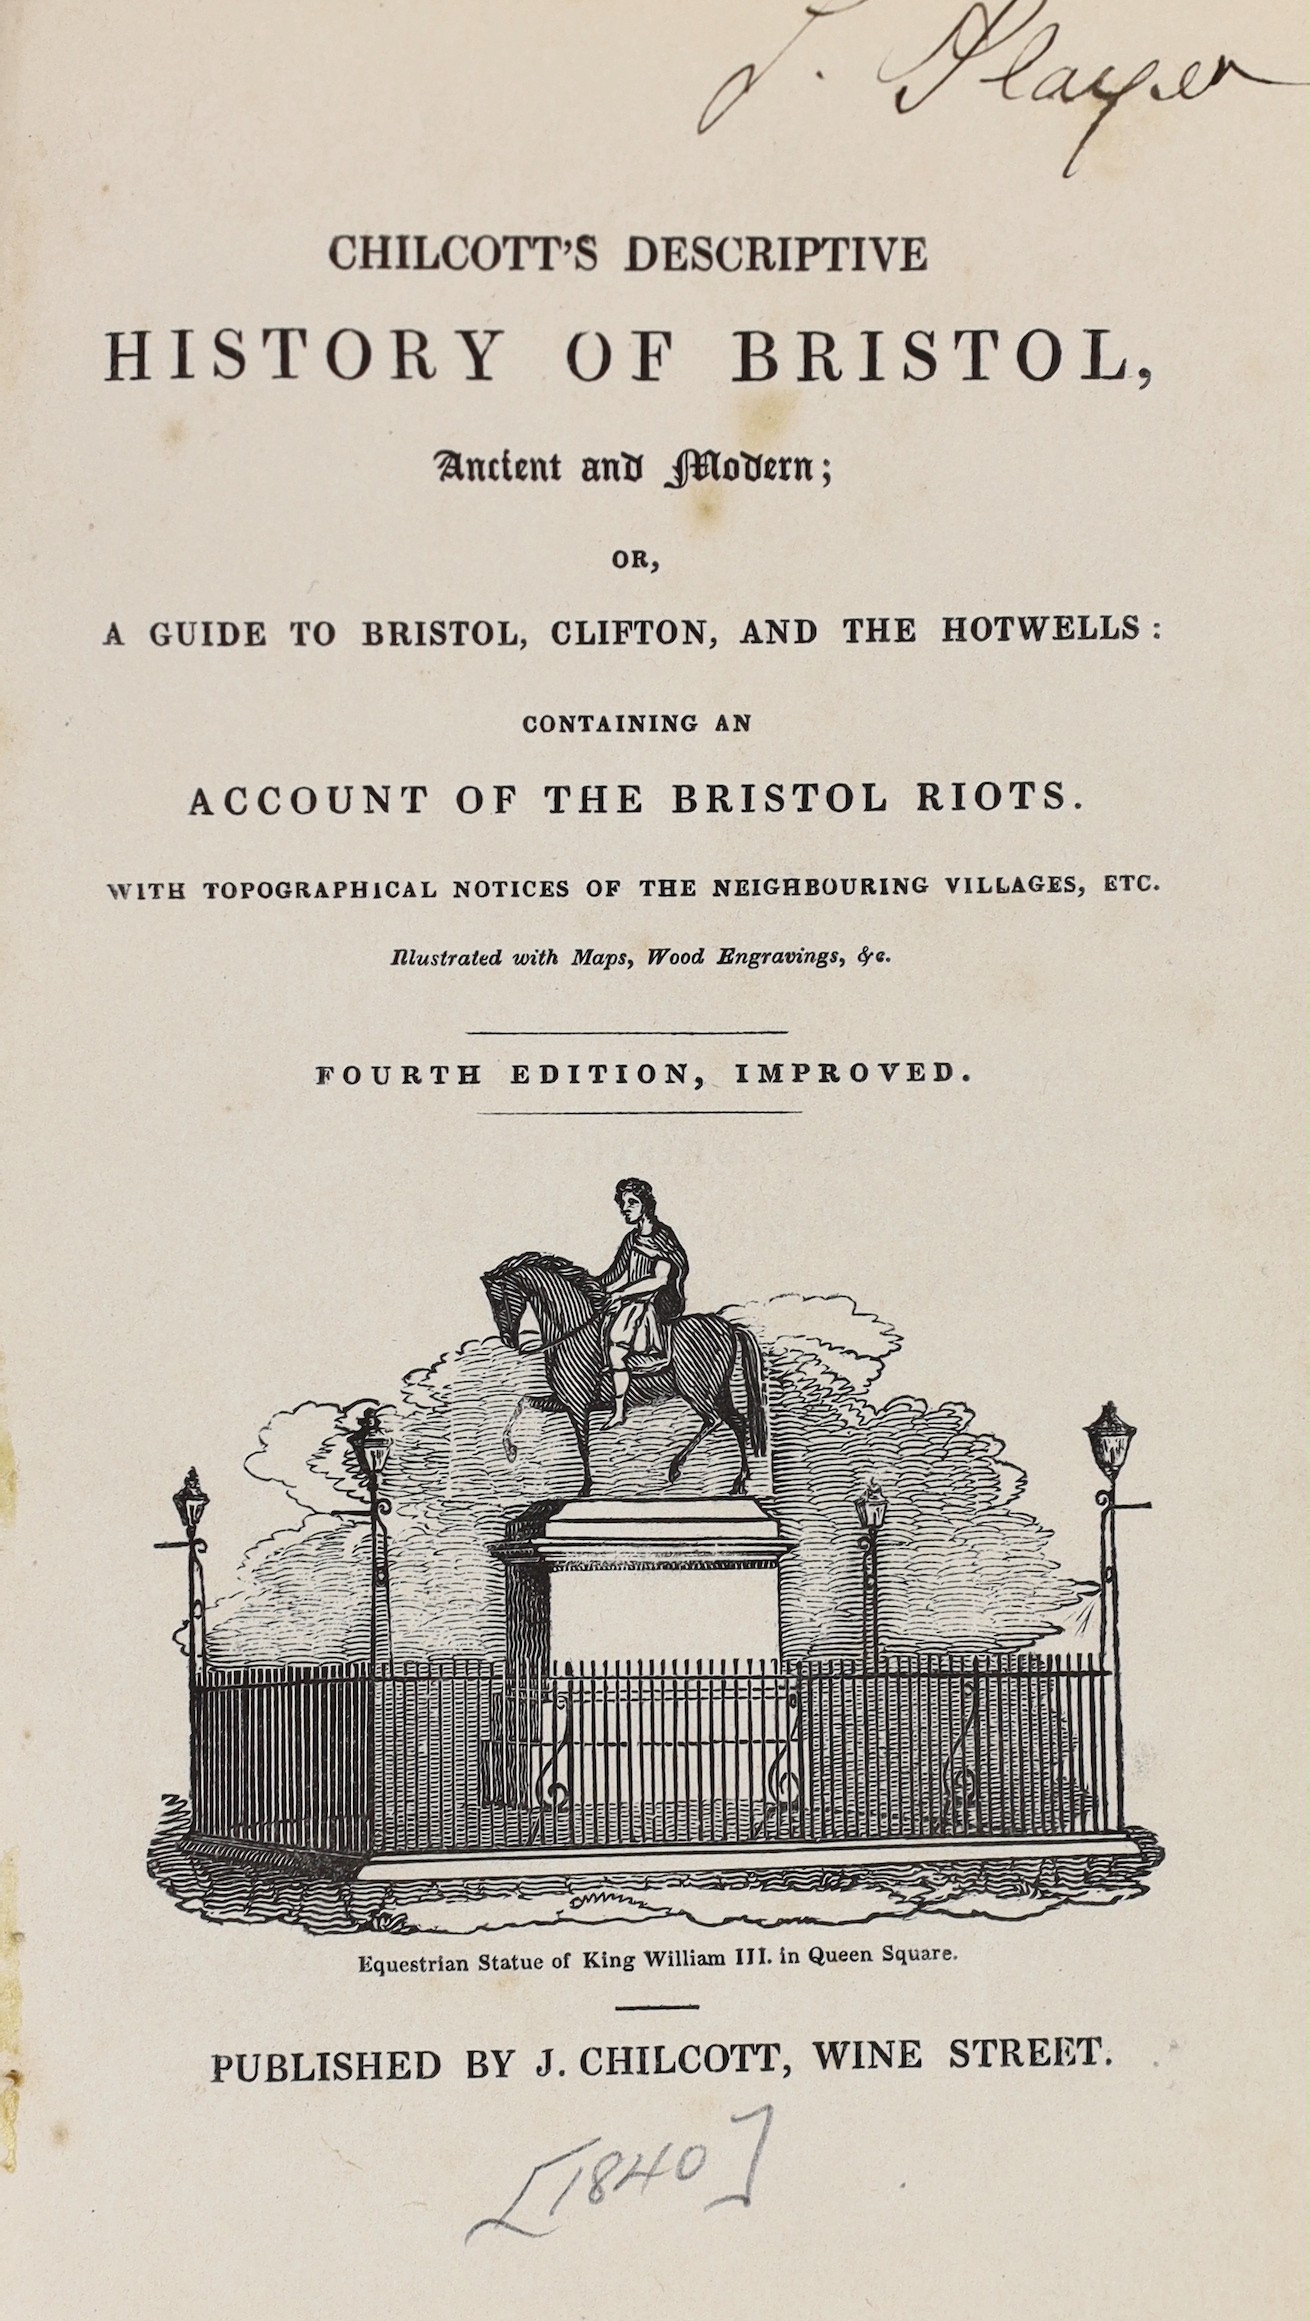 SOMERSET, BRISTOL: Chilcott's Descriptive History of Bristol ... or, a Guide to Bristol, Clifton, and the Hotwells: containing an account of the Bristol Riots ... 3rd edition, improved. frontis.